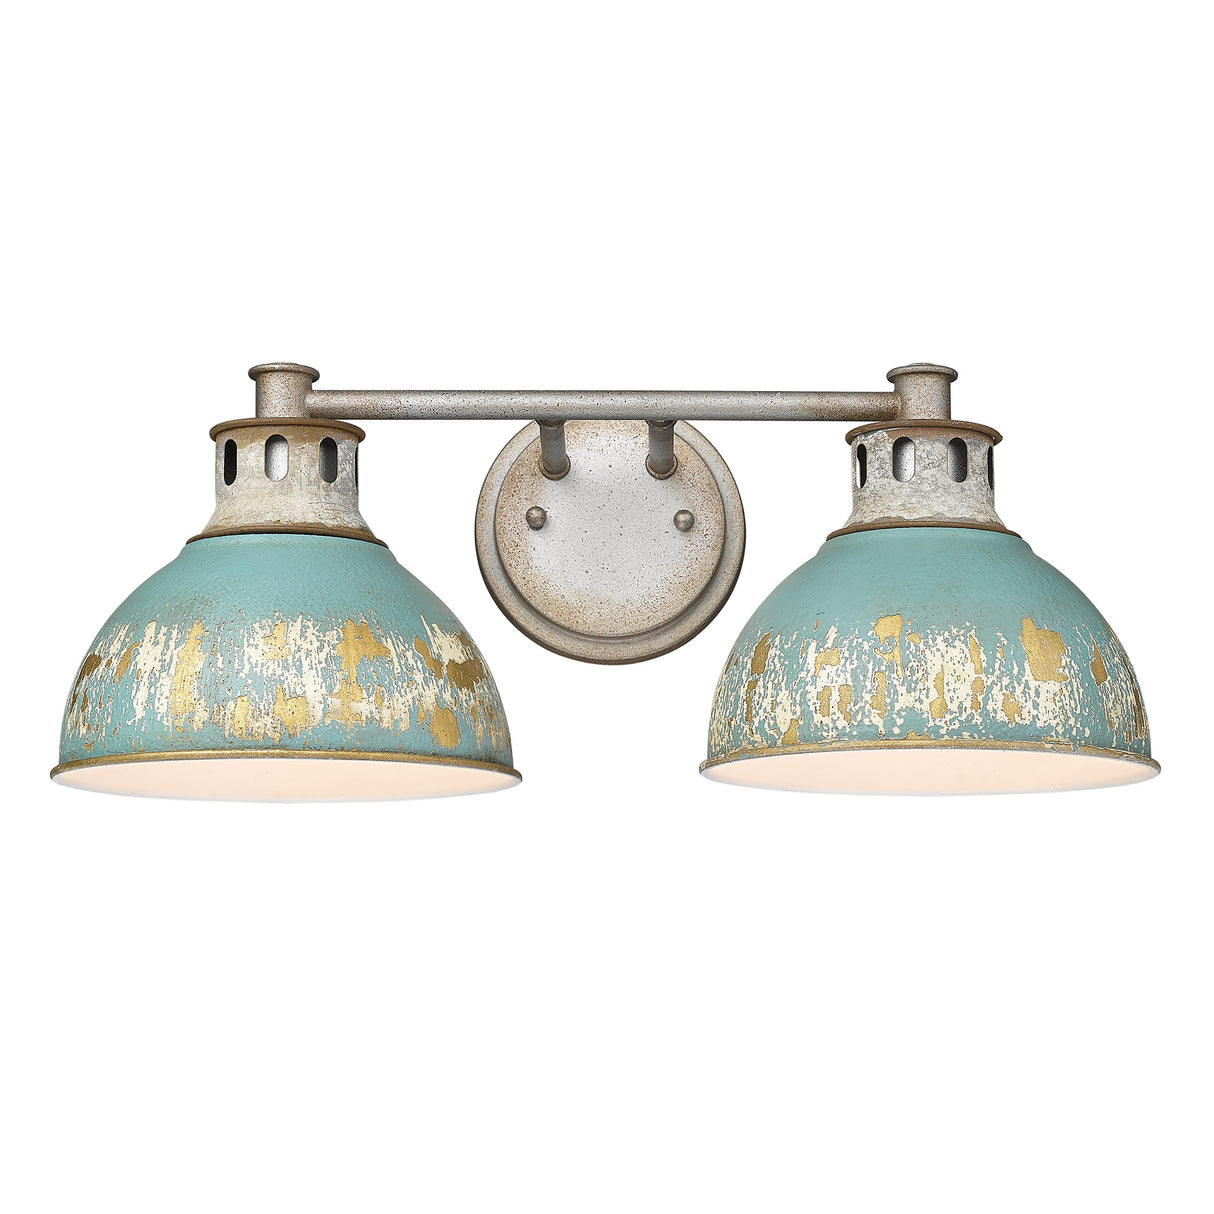 Kinsley 2 Light Bath Vanity in Aged Galvanized Steel with Antique Teal Shade